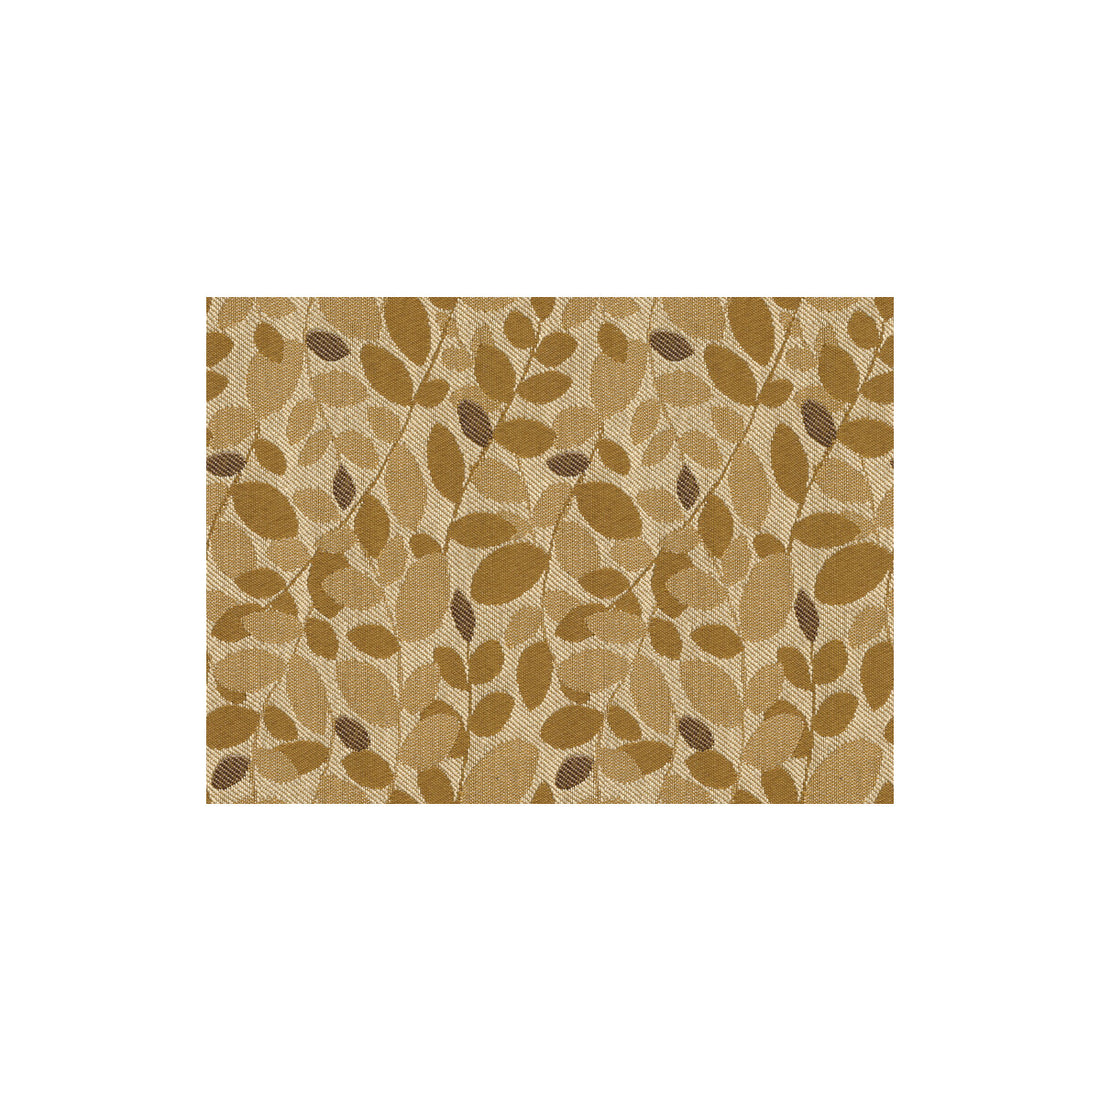 Branch Out fabric in honey color - pattern 32250.411.0 - by Kravet Contract